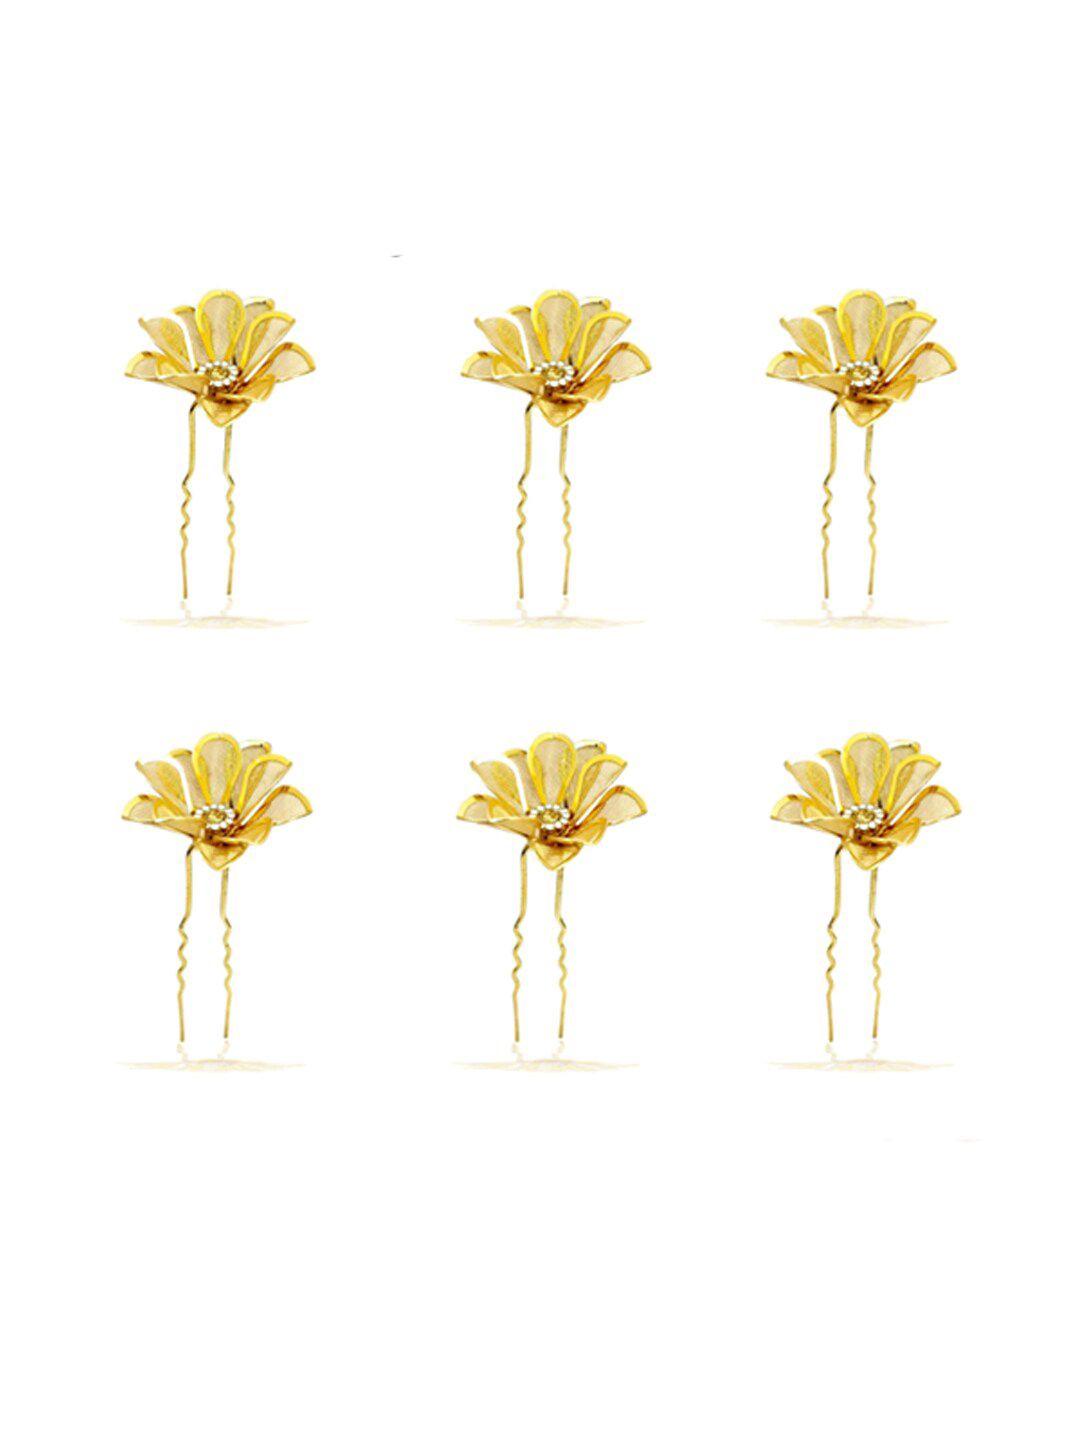 hair flare women set of 6 artificial rounded leaf designed flowers with stones  u pins